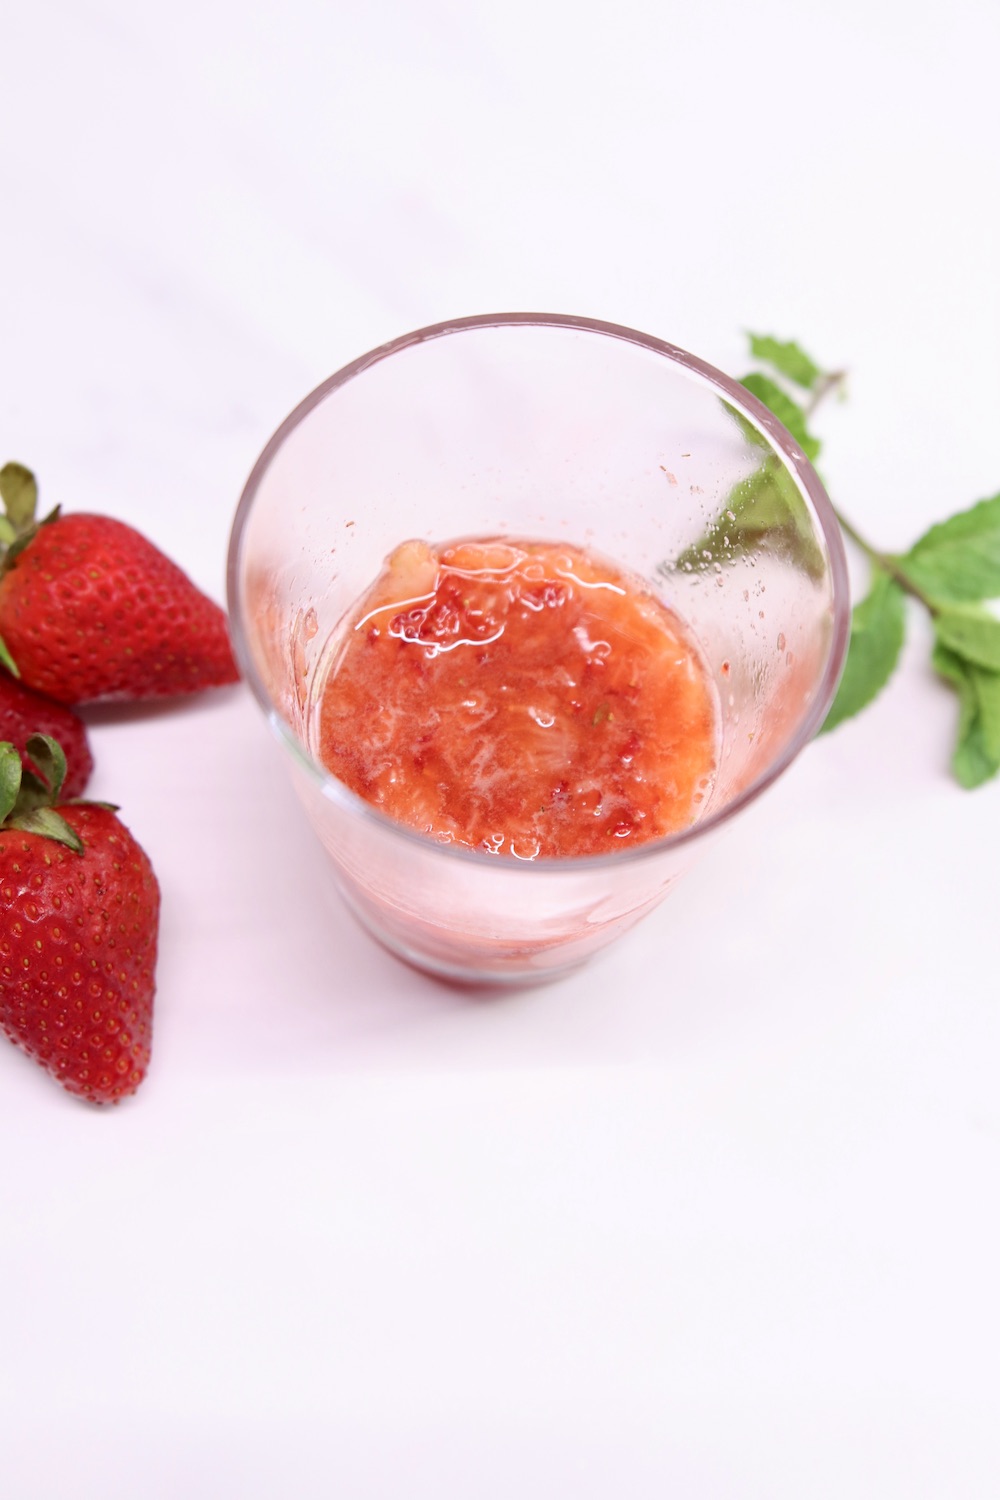 muddled strawberries in a glass